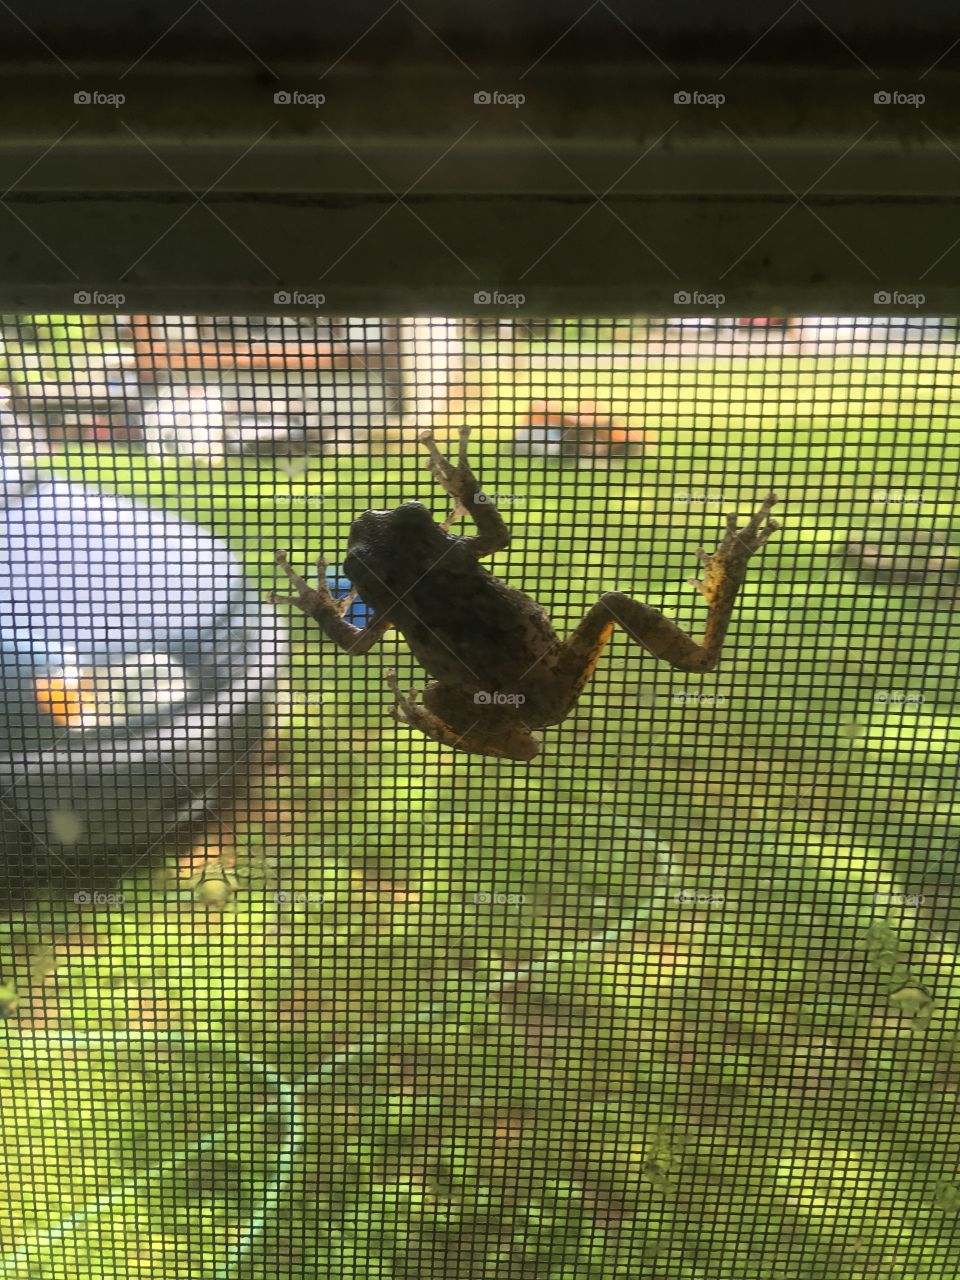 My new friend a little tree frog whom found his way onto our screen after a thunderstorm.